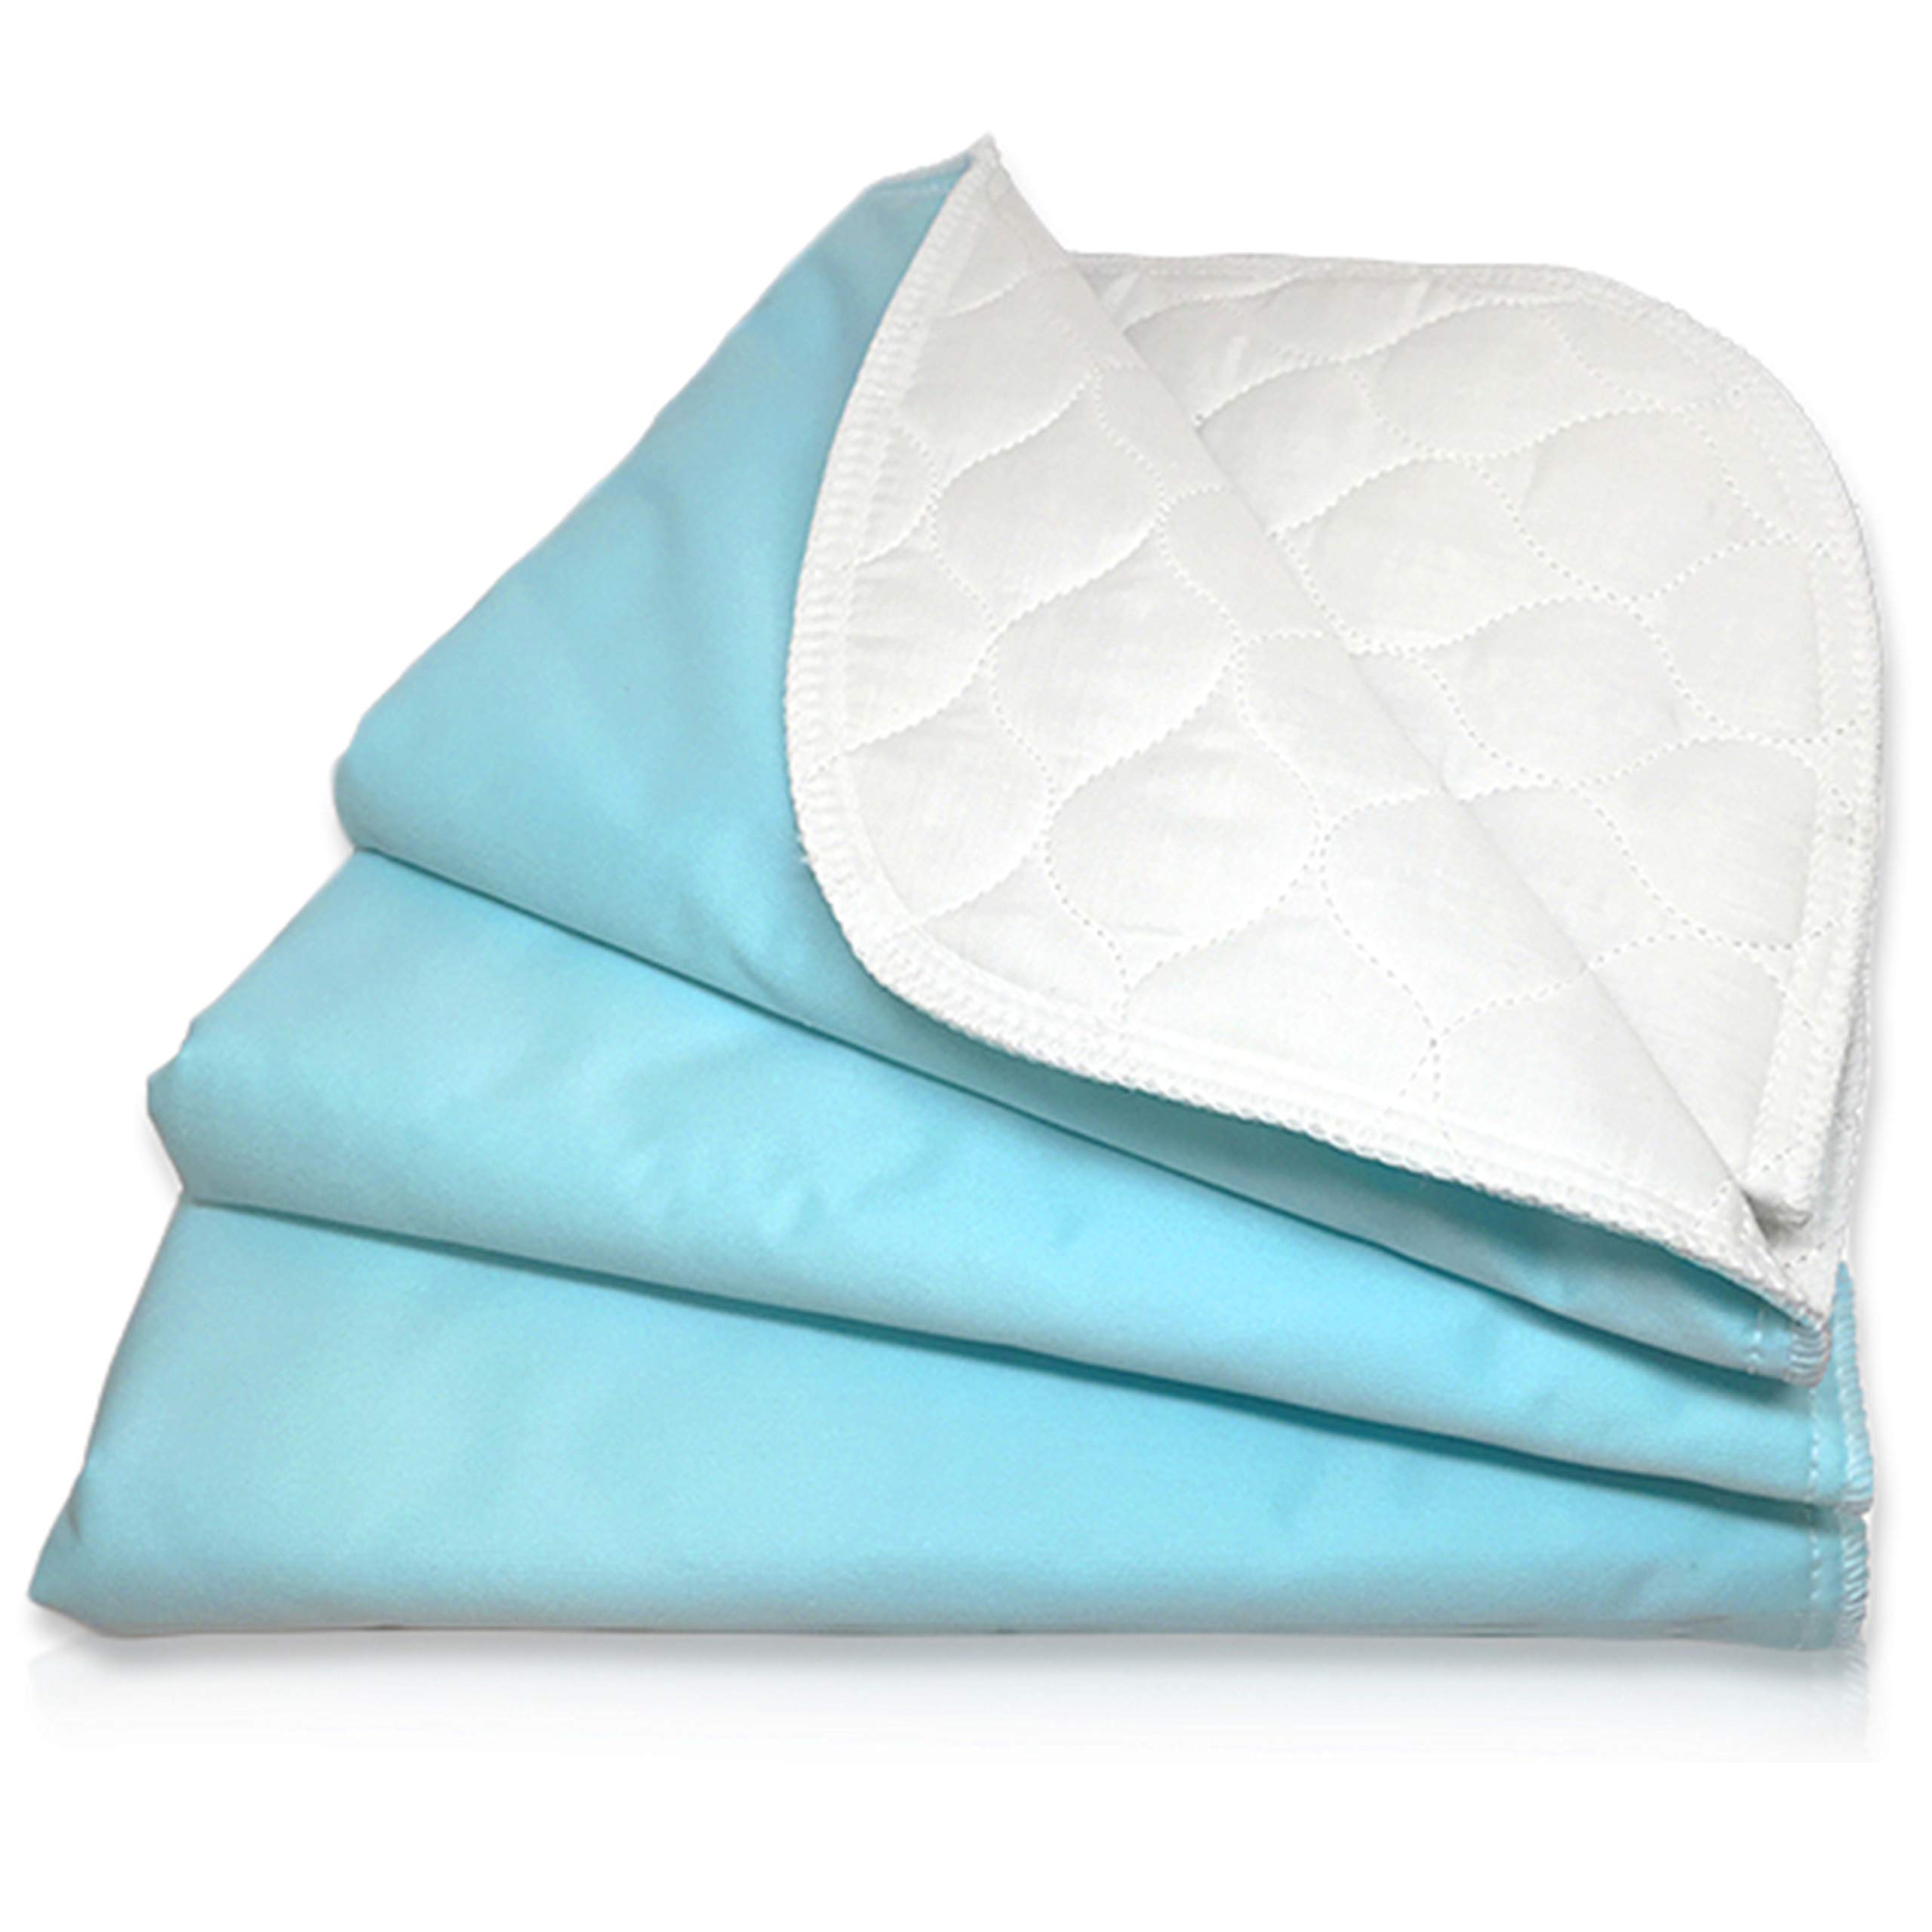 Bed Wetting PadsReusable Bed Pads for Incontinence